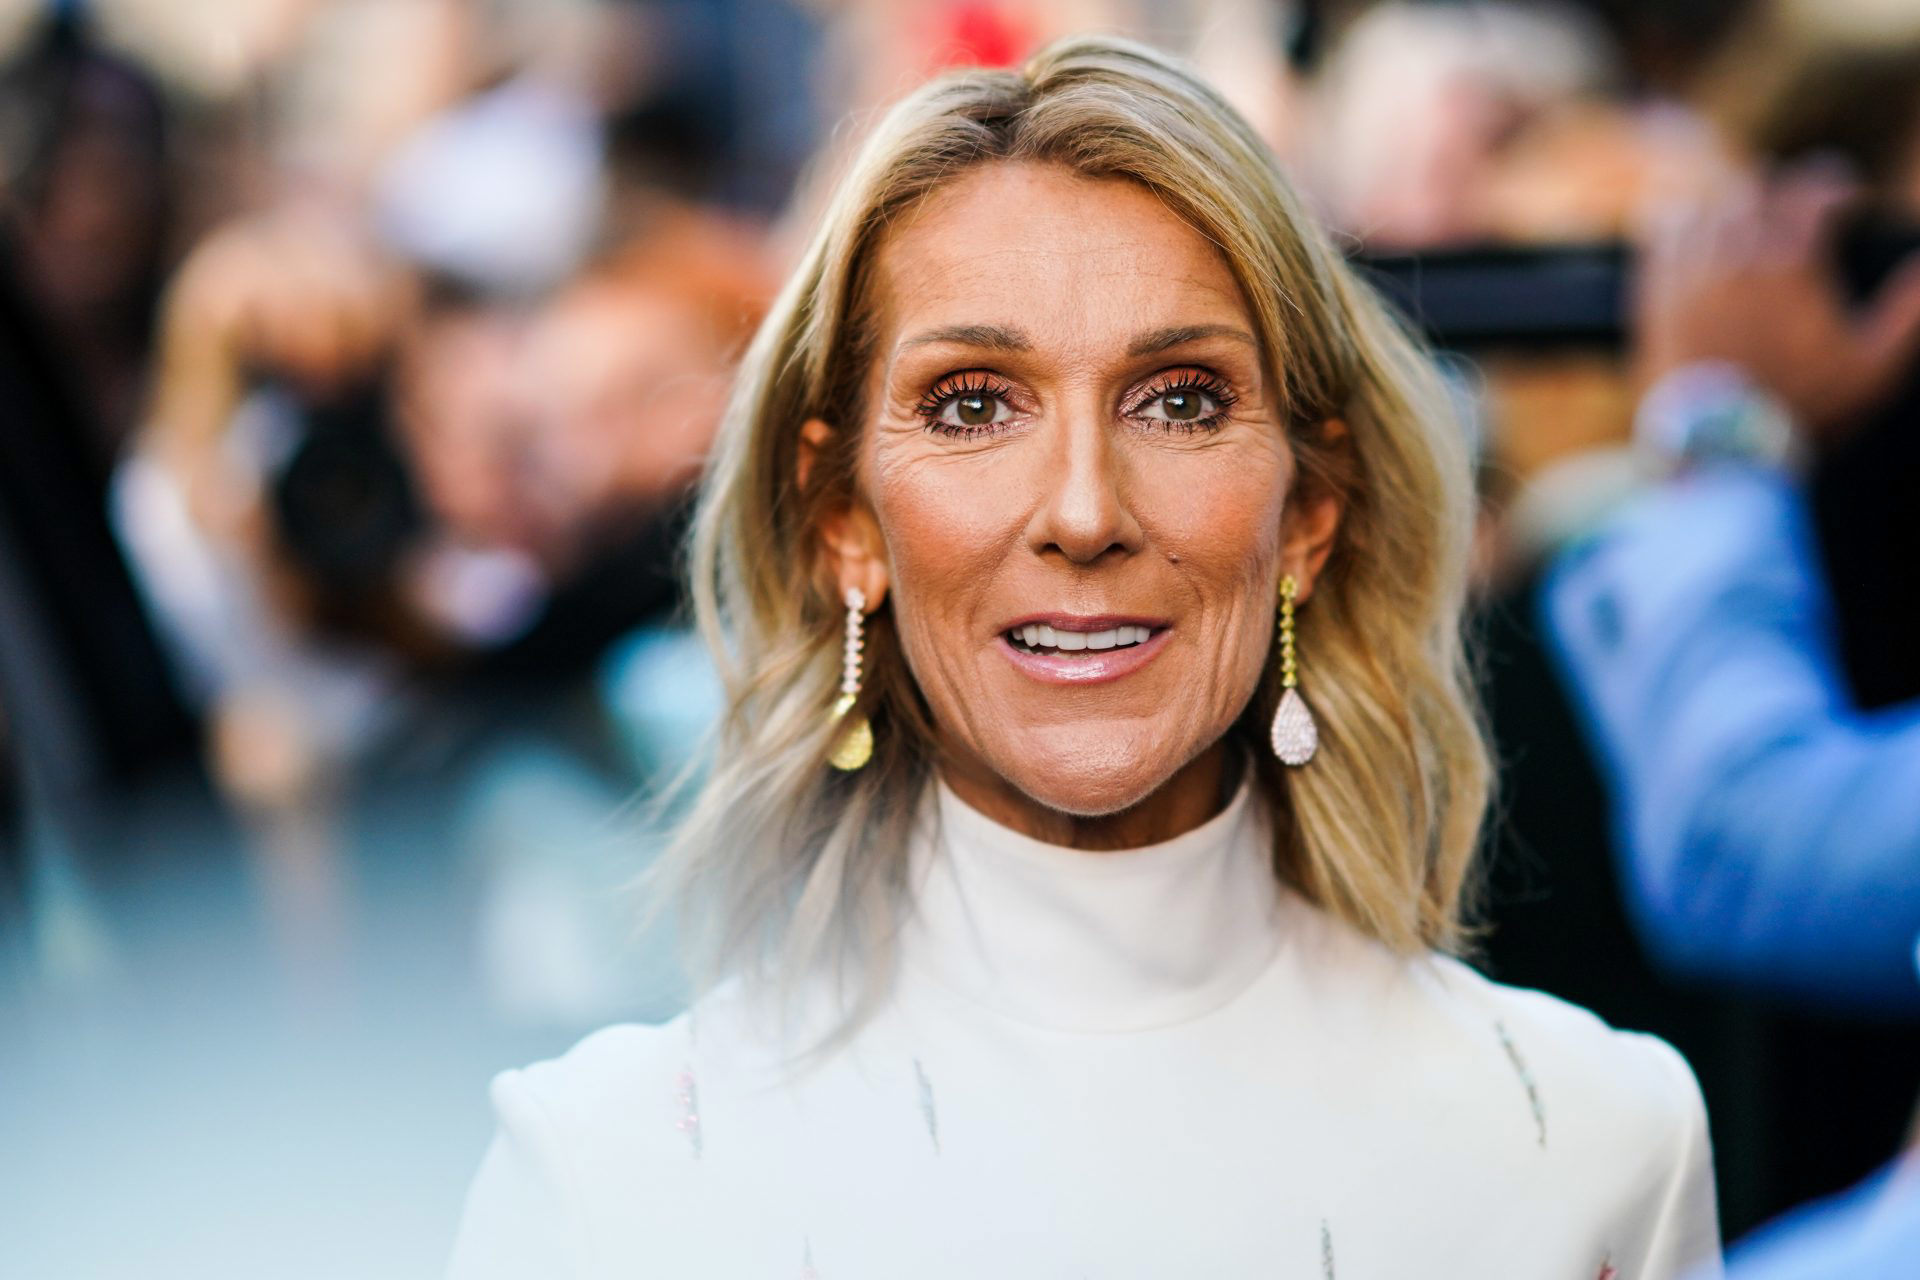 Céline Dion and the 'Raw' documentary on her health battle